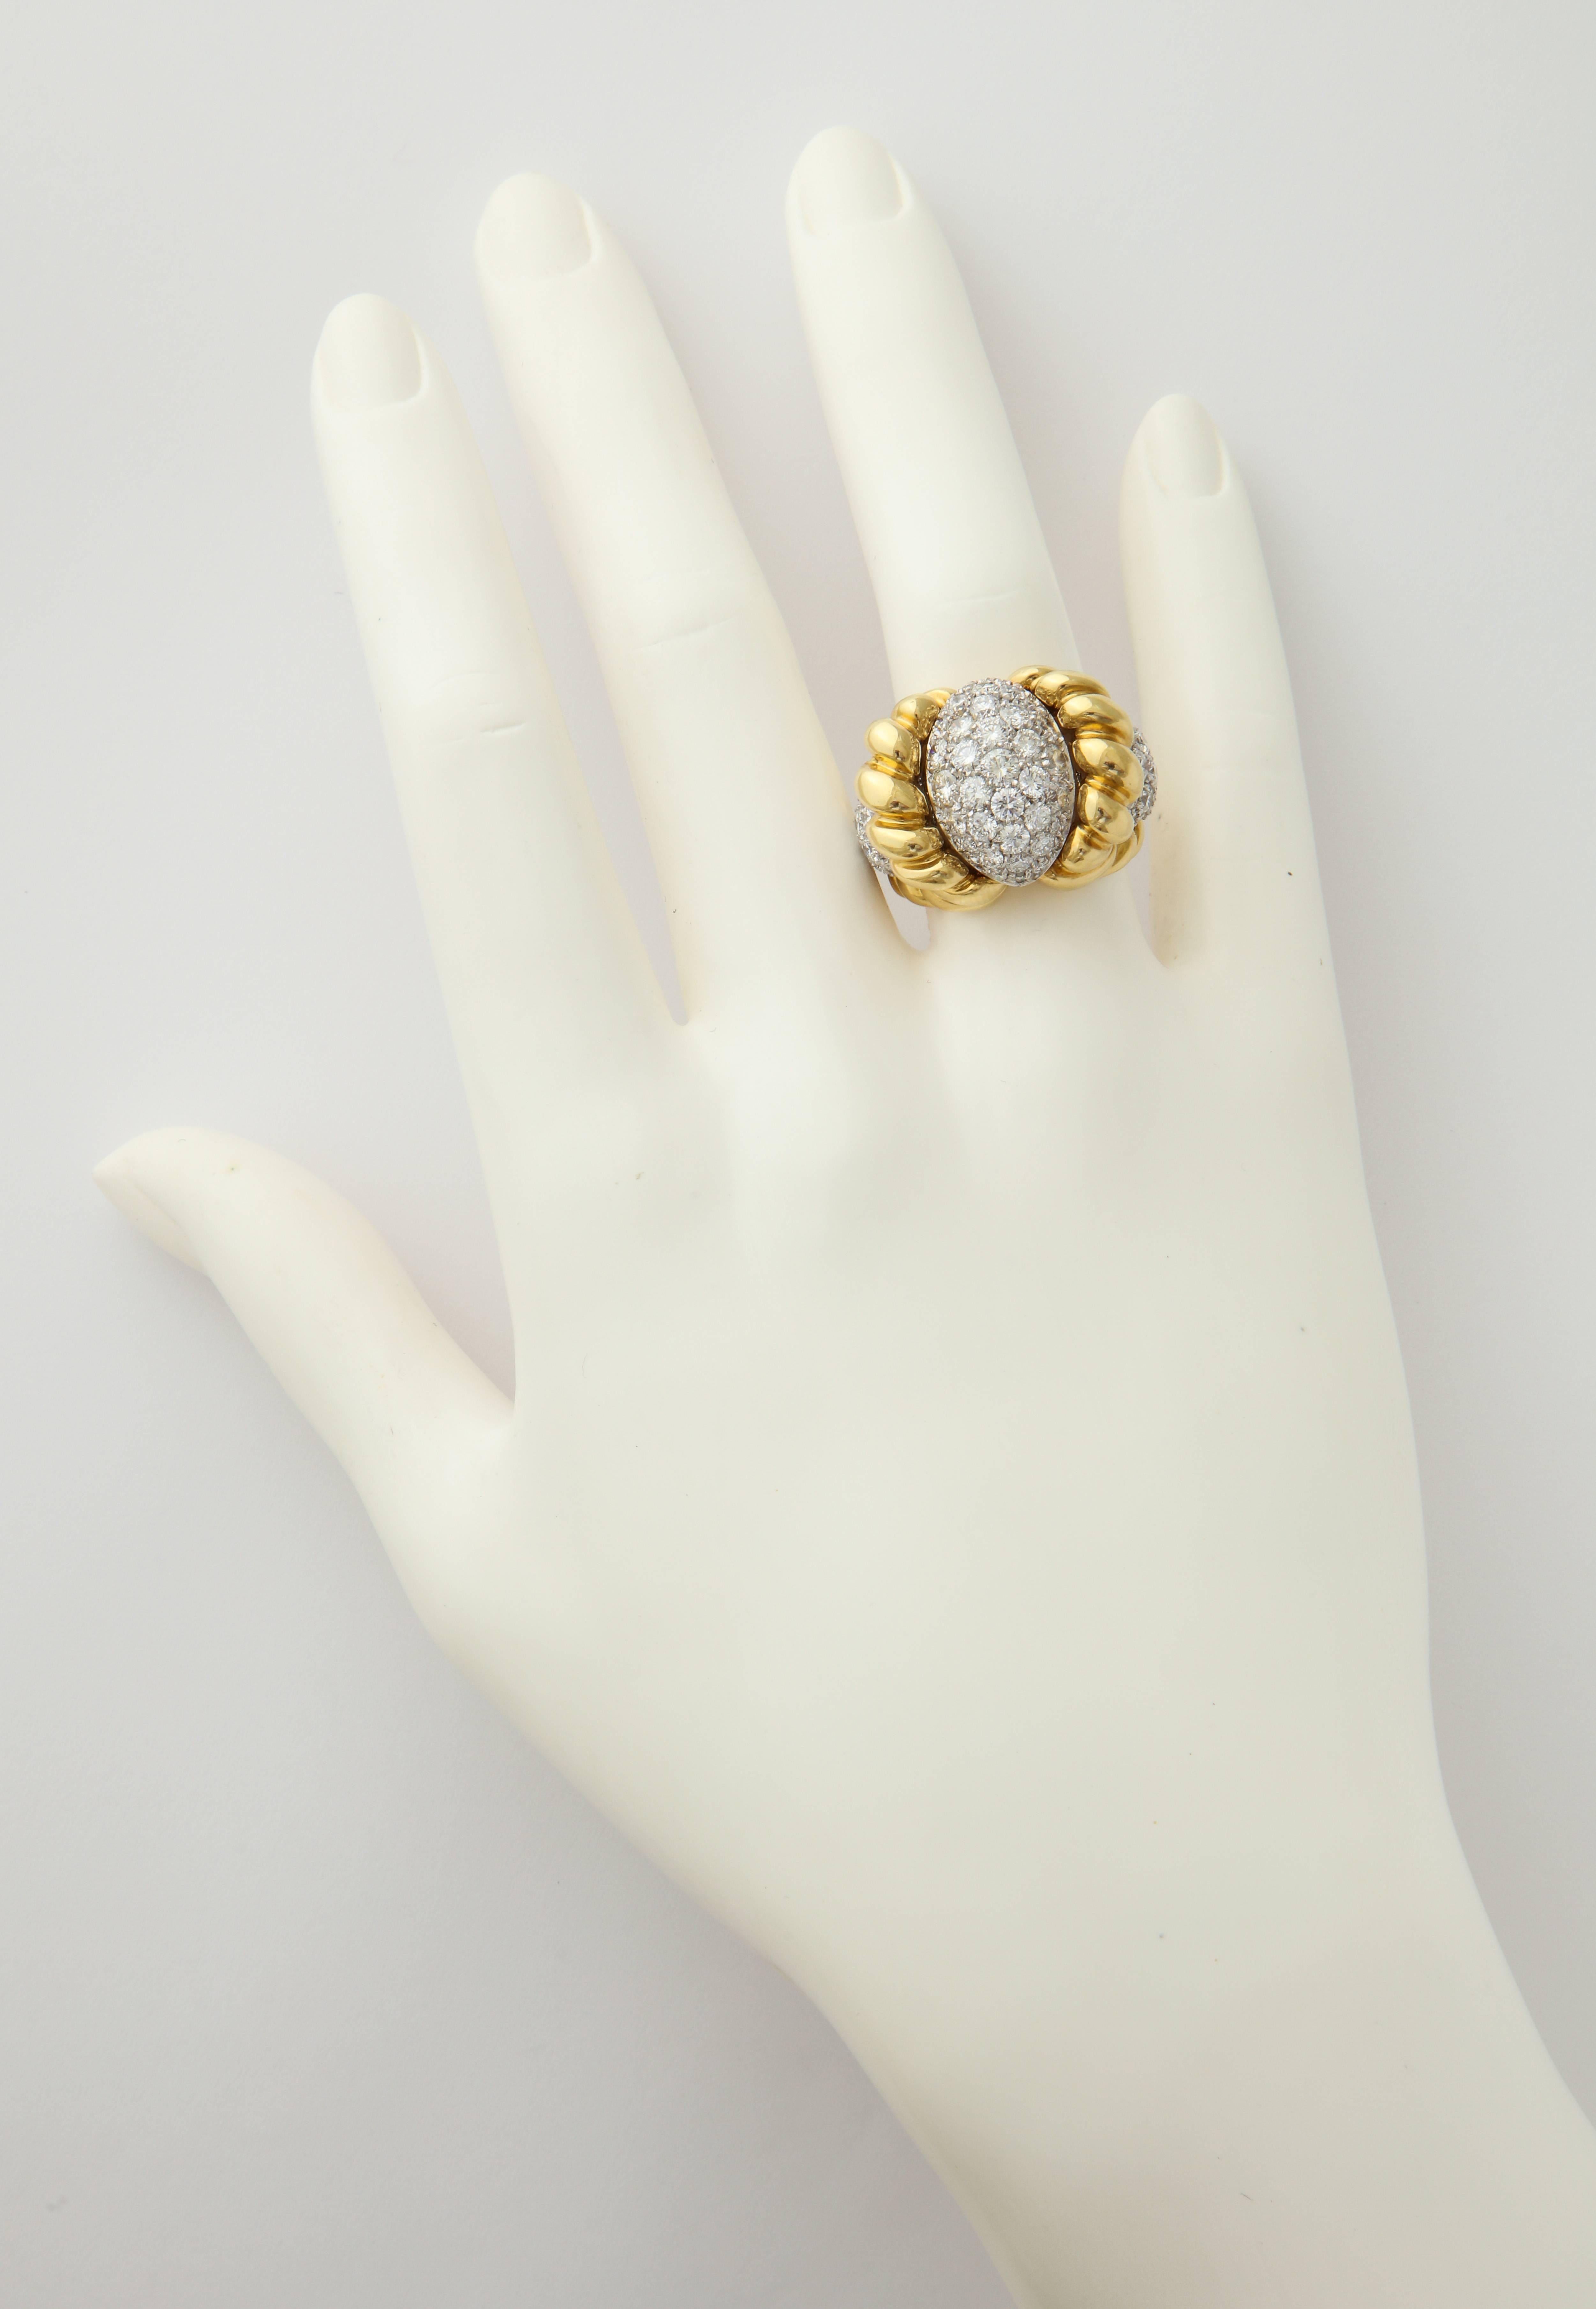 The perfect mixture of yellow and white gold set with bright, white diamonds truly epitomizes the term "cocktail ring".  This one was made in Italy and is set with 3.88cts of diamonds.  The ribbed, polished gold motif perfectly frames the